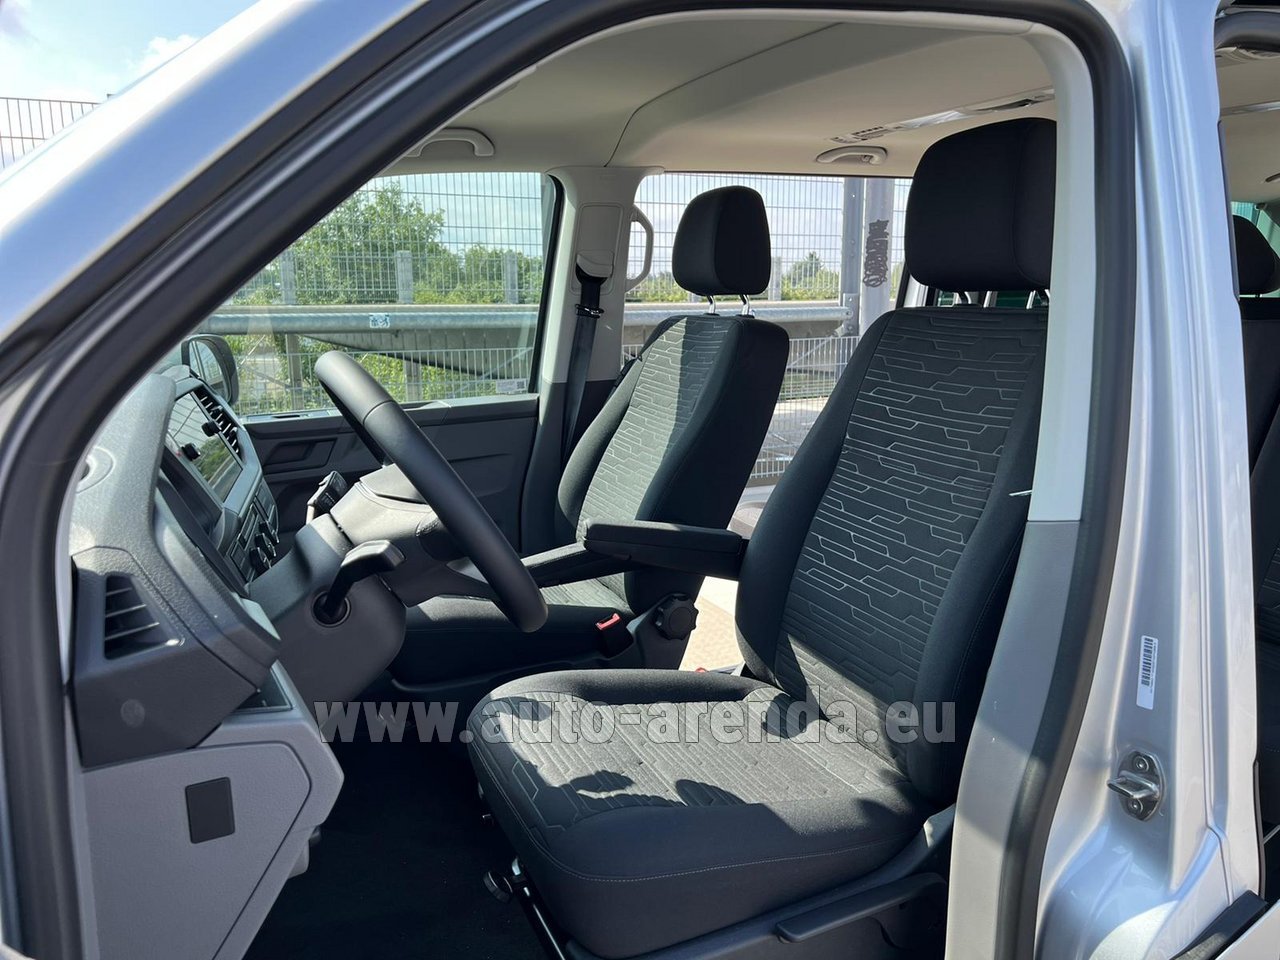 Rent Volkswagen Caravelle T6.1 2.0 TDI extra Long (8 seats) in Cote D'azur  International Airport